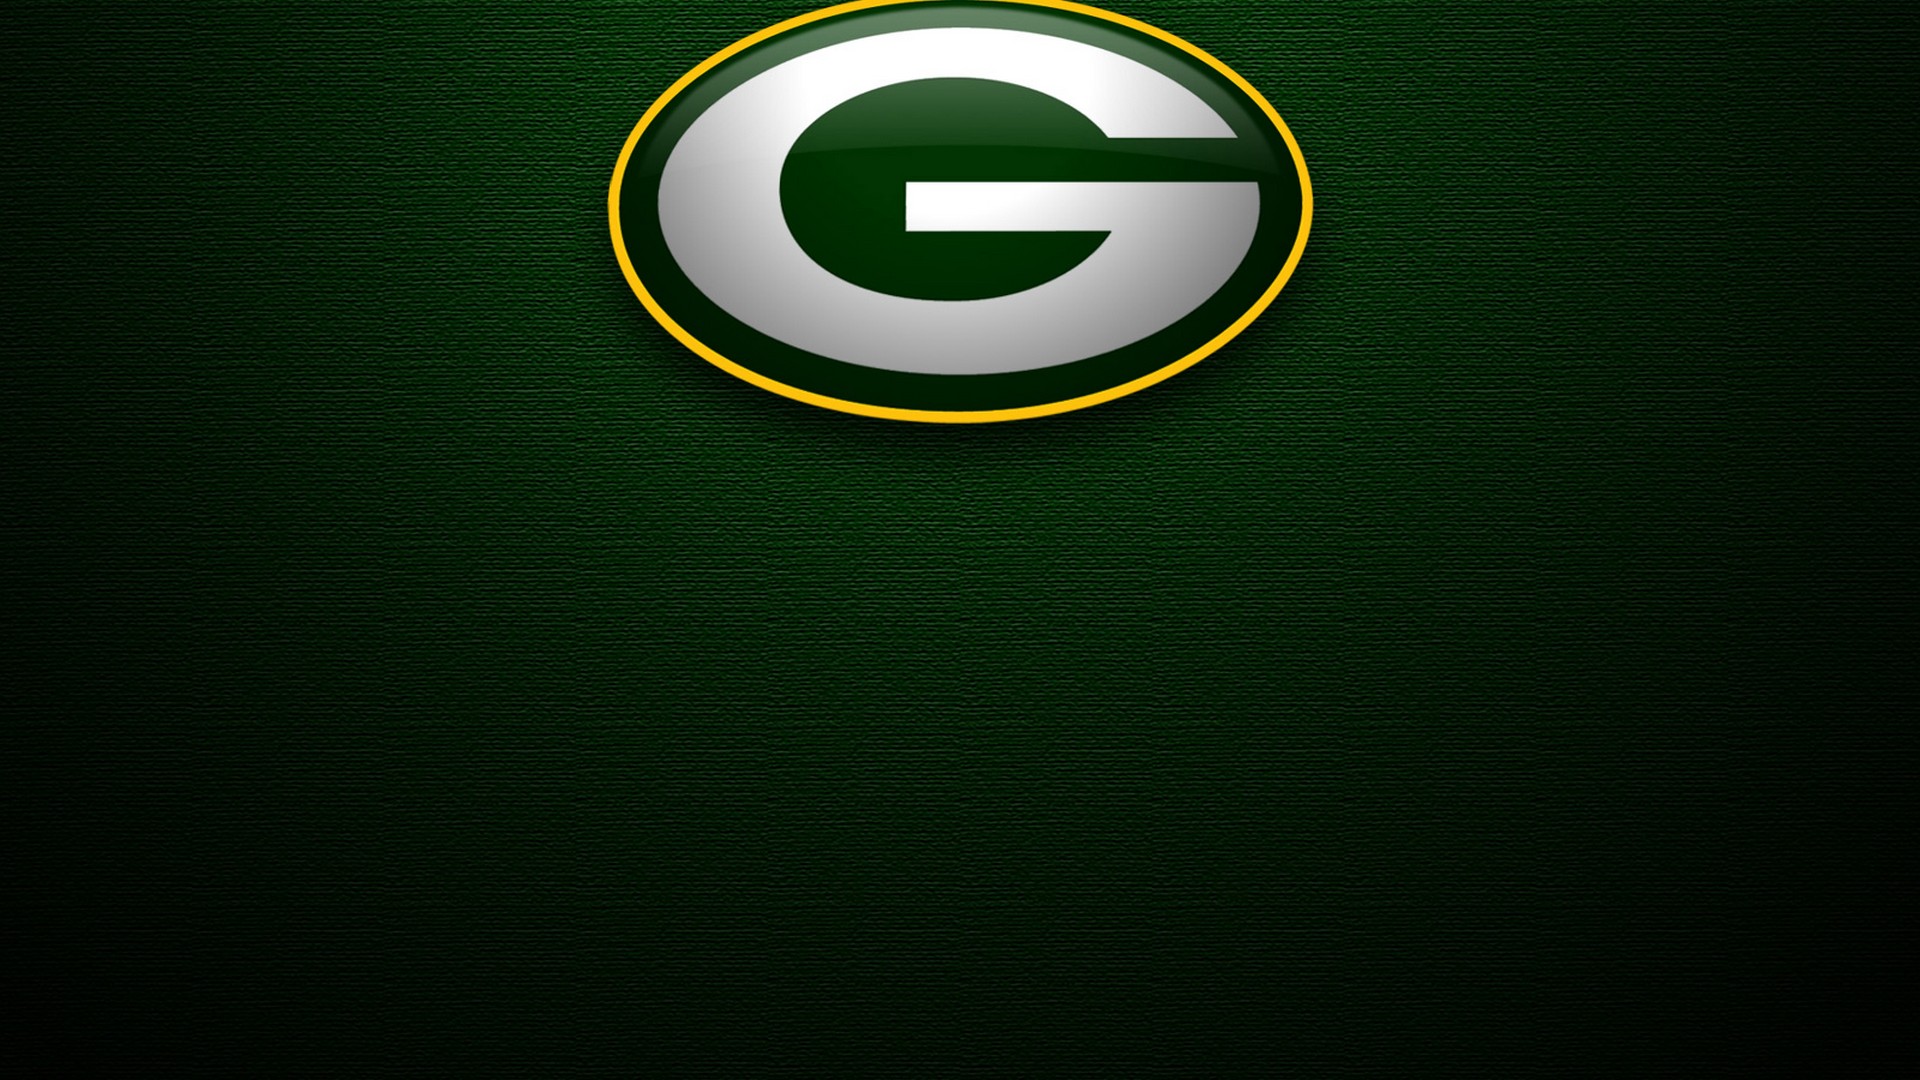 Green Bay Packers NFL Desktop Wallpaper with resolution 1920x1080 pixel. You can make this wallpaper for your Mac or Windows Desktop Background, iPhone, Android or Tablet and another Smartphone device